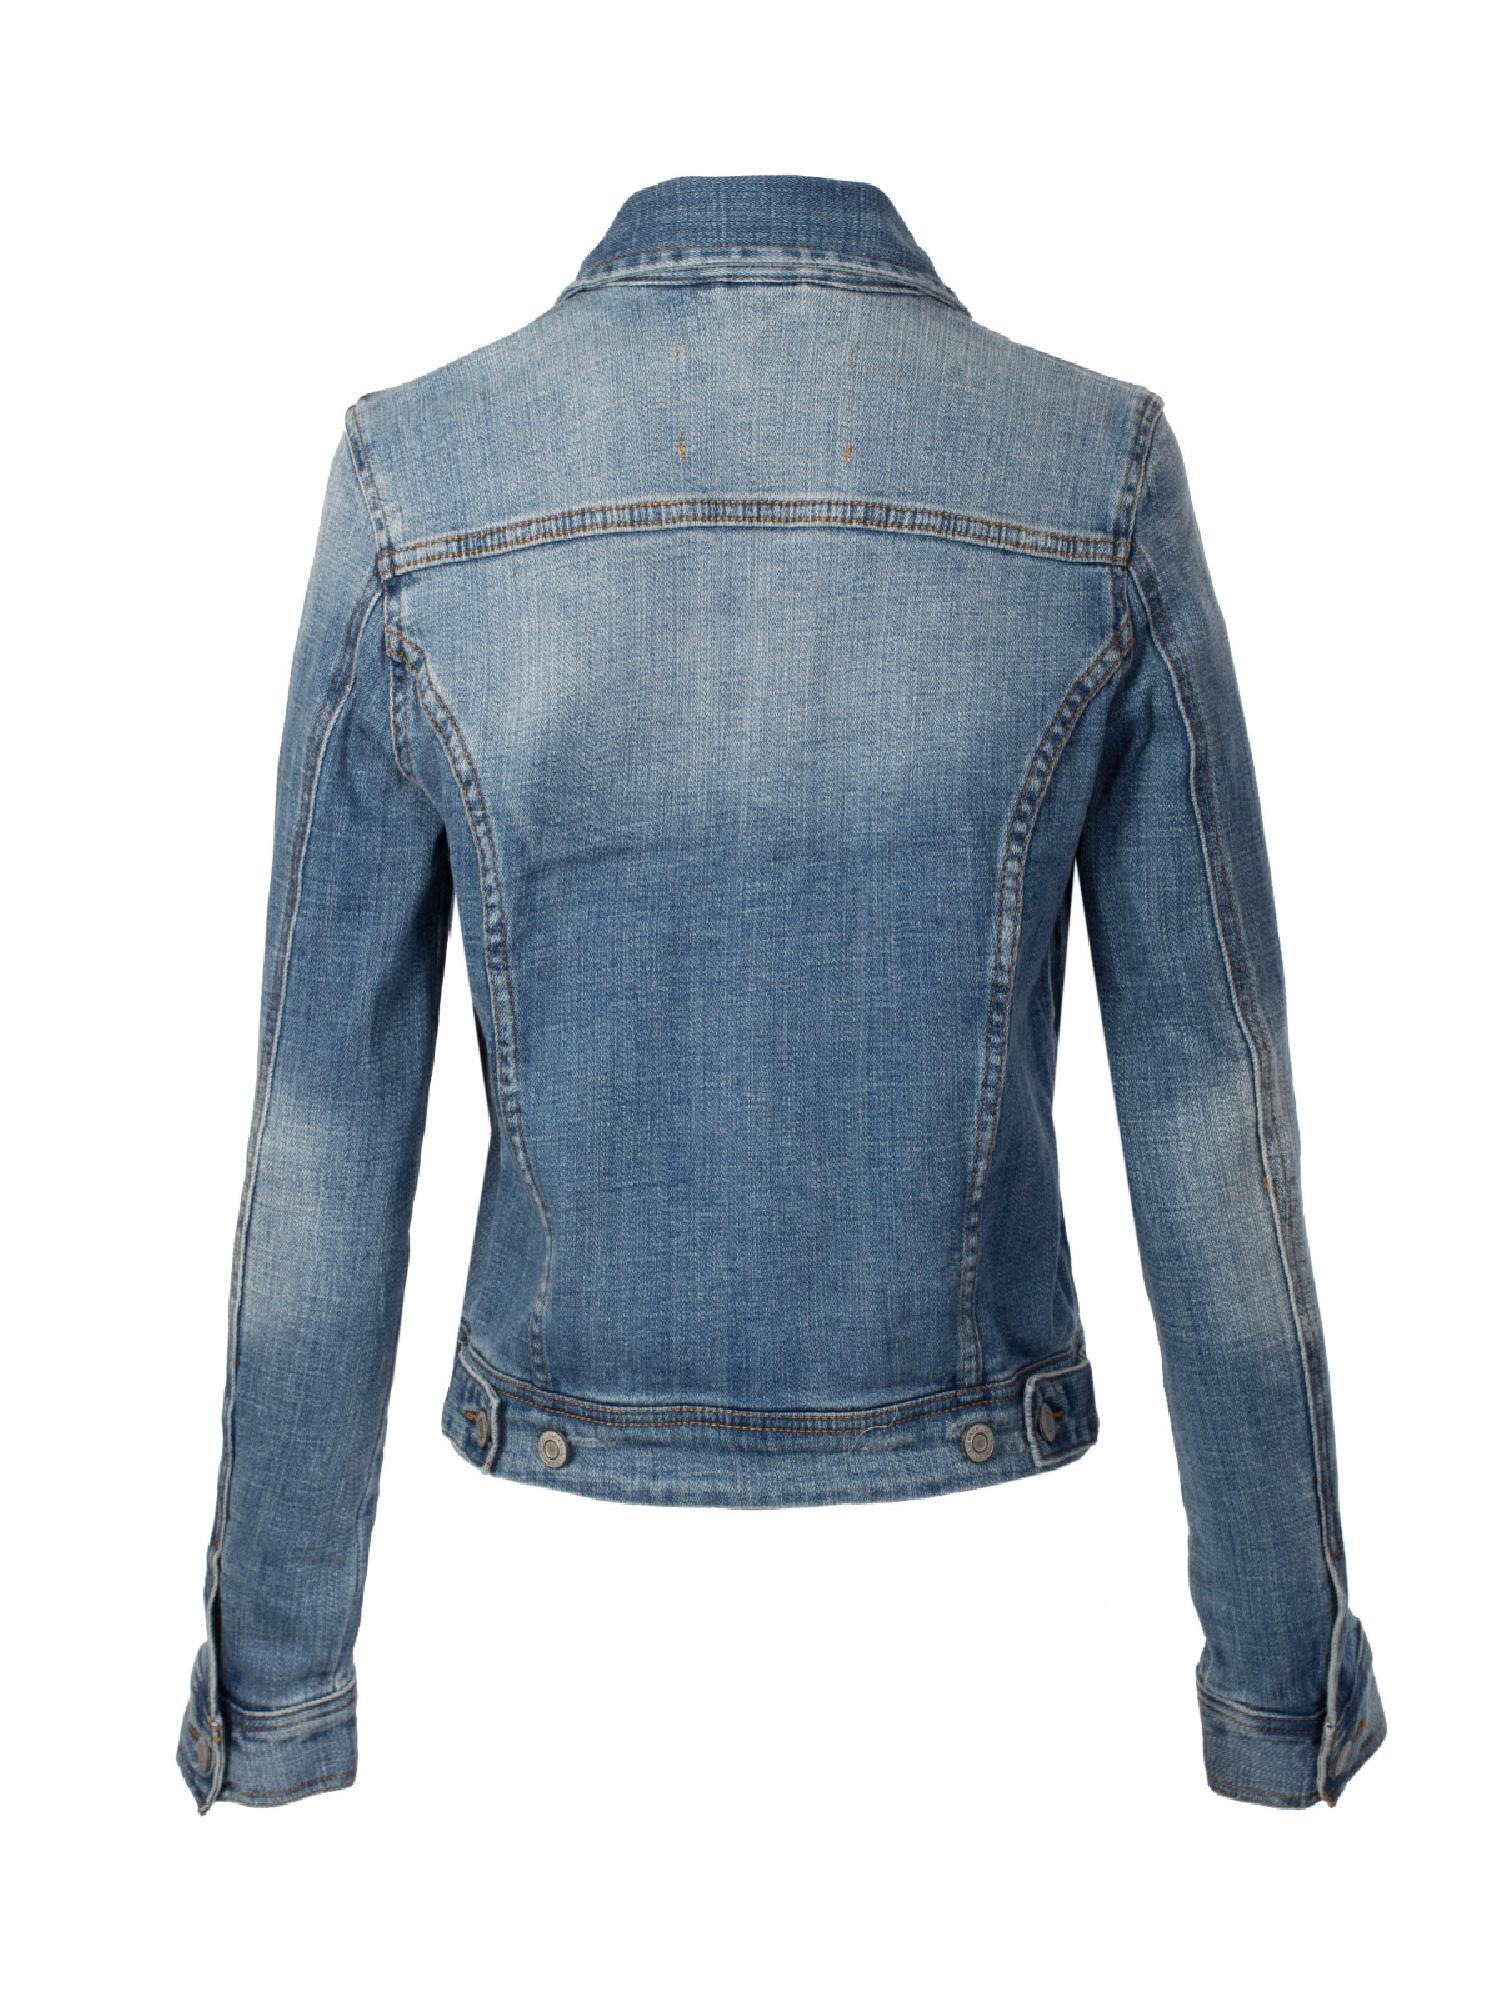 Made by Olivia Women's Classic Casual Vintage Denim Jean Jacket - image 4 of 5